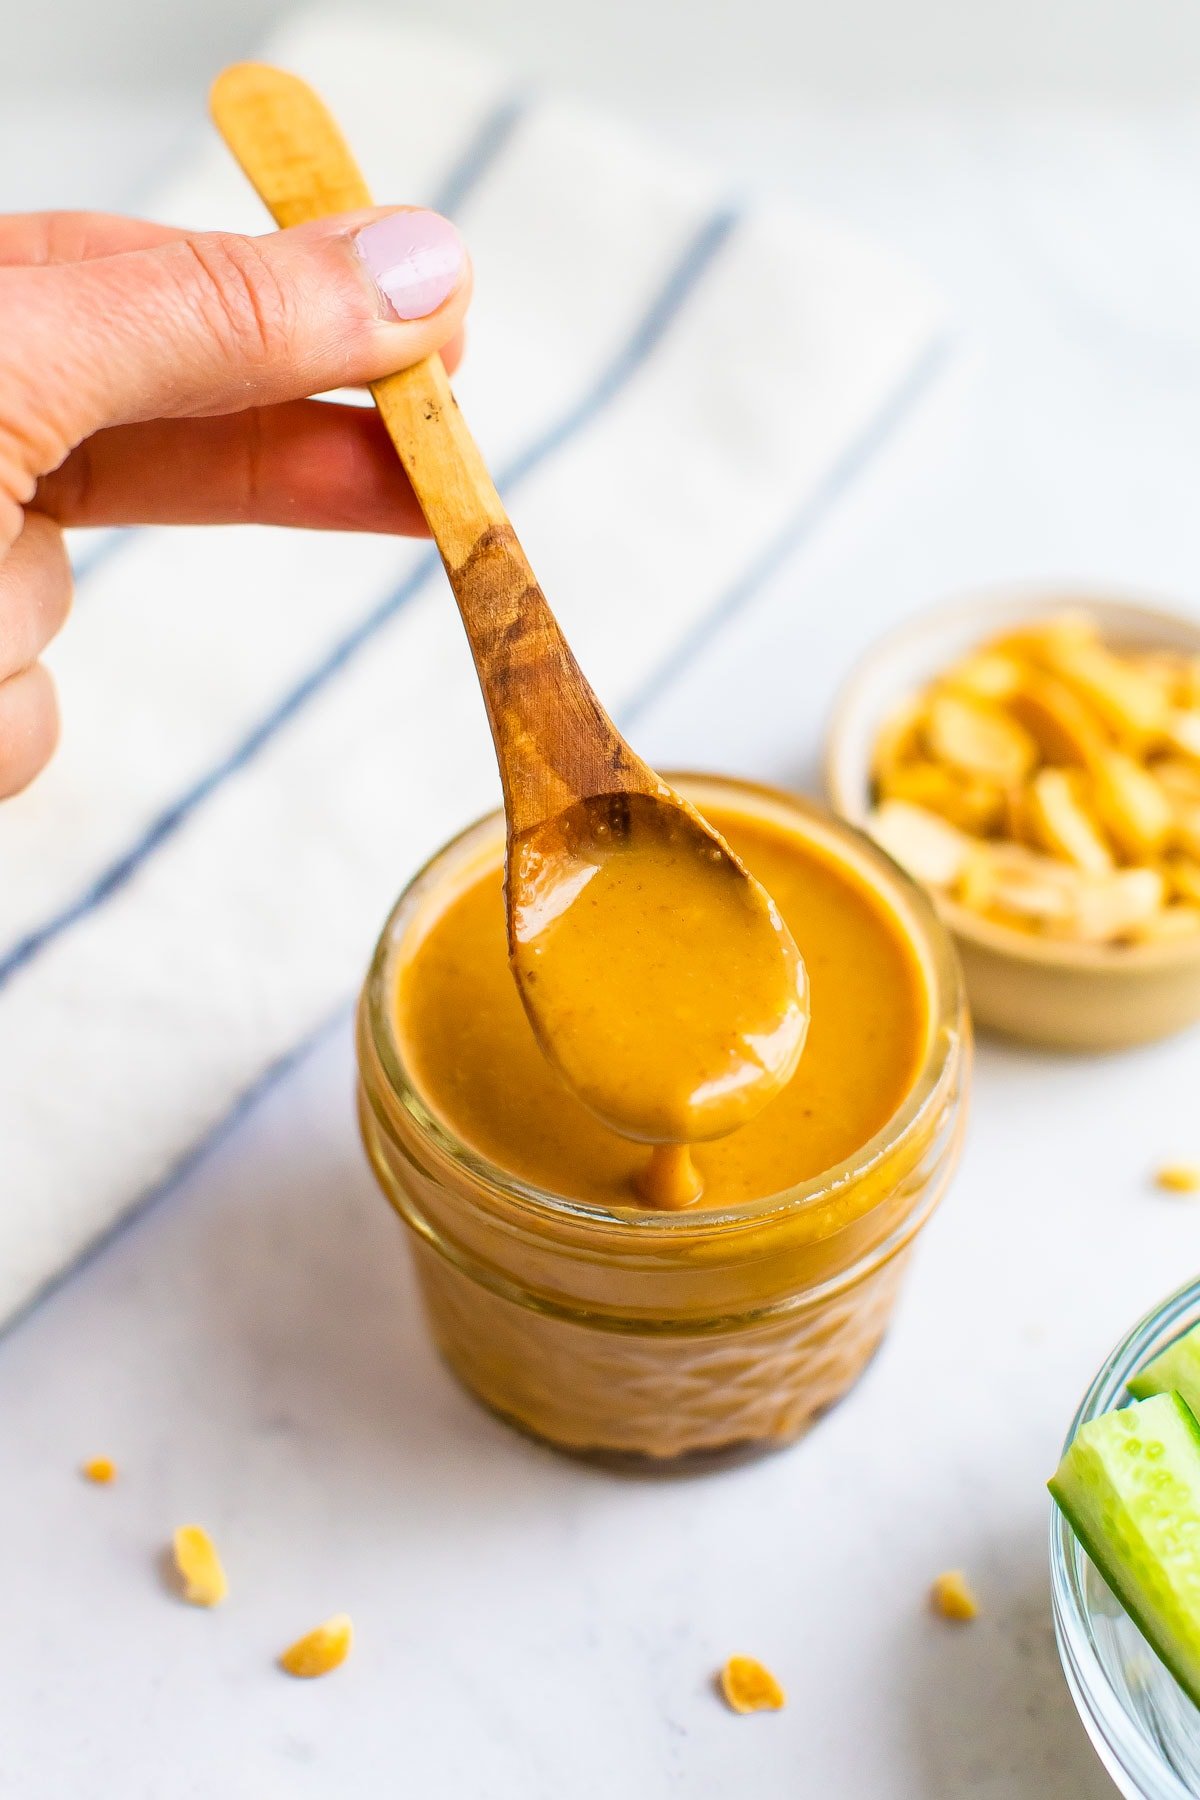 Spoon with a spoonful of peanut dressing from a small glass jar with peanut dressing.